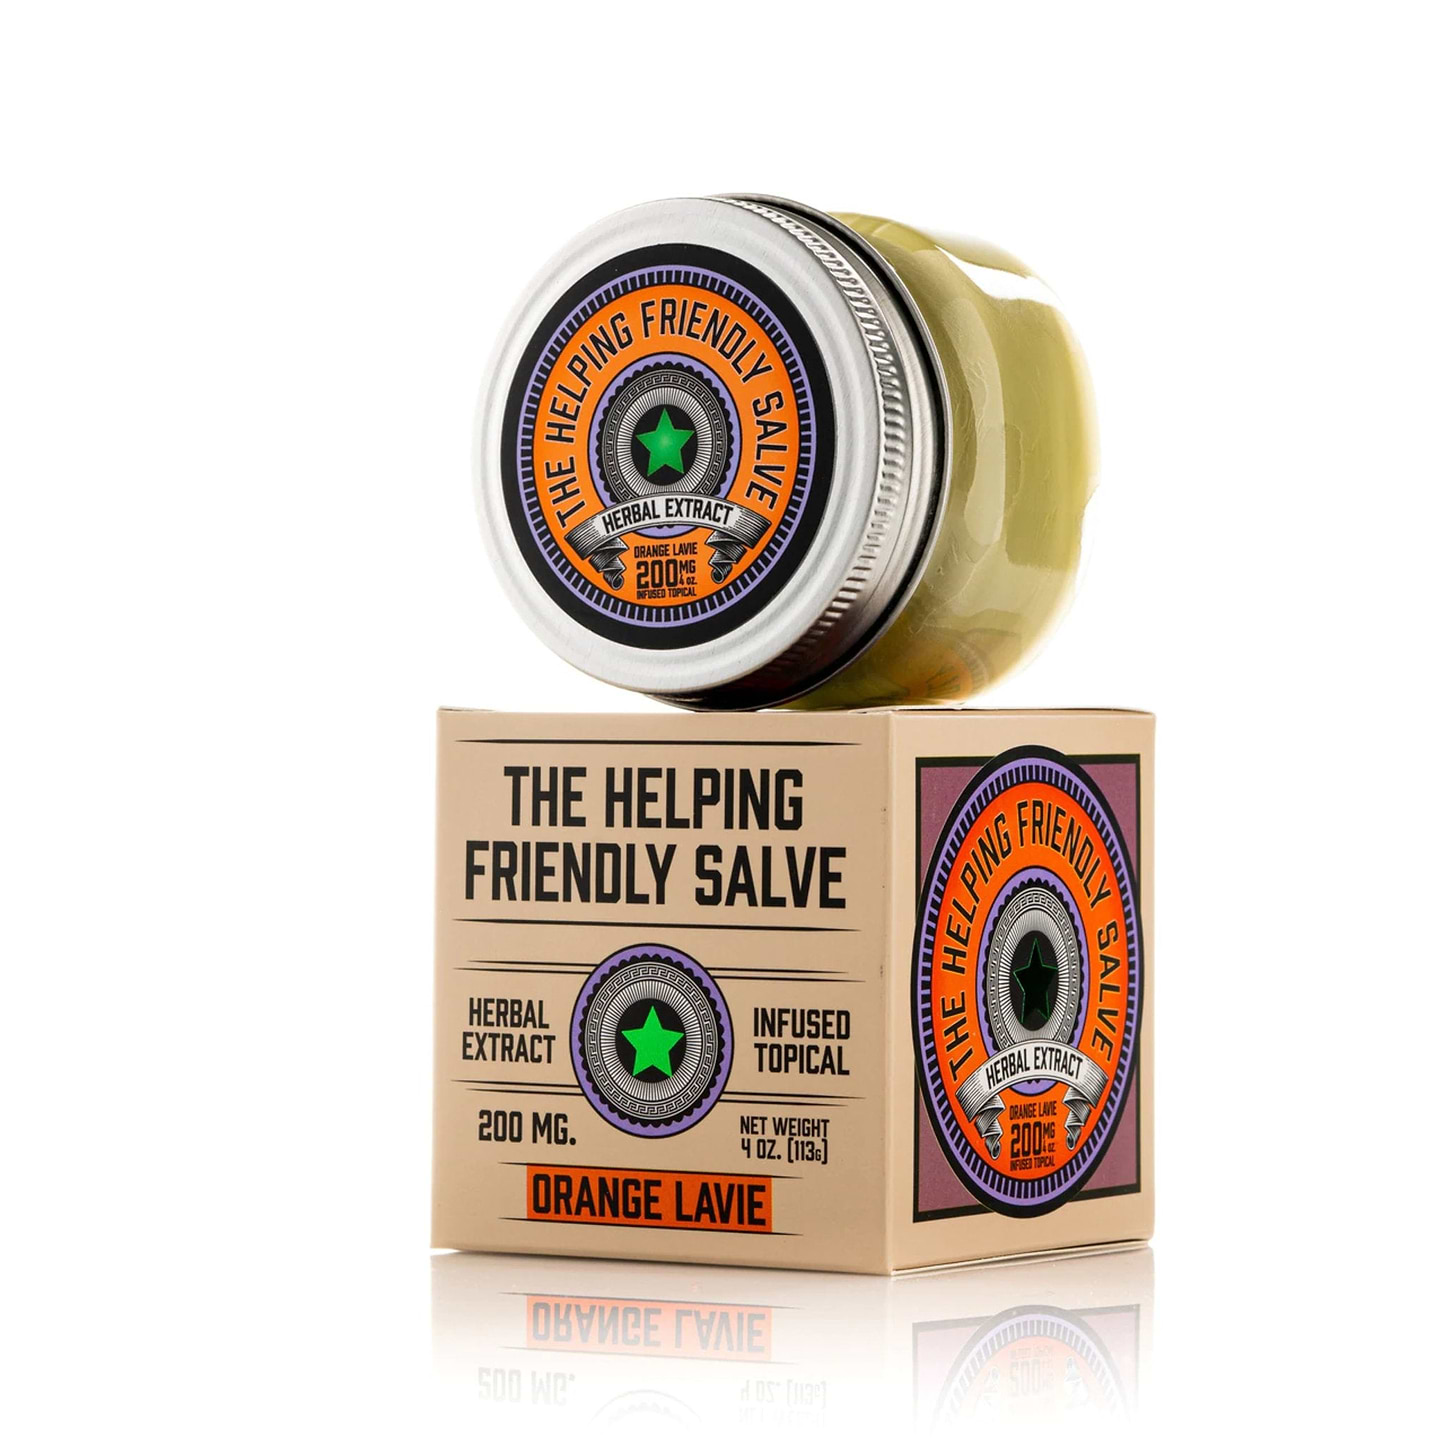 The Helping Friendly Herbal Extract Topical - 200mg 200mg / Orange Lavie